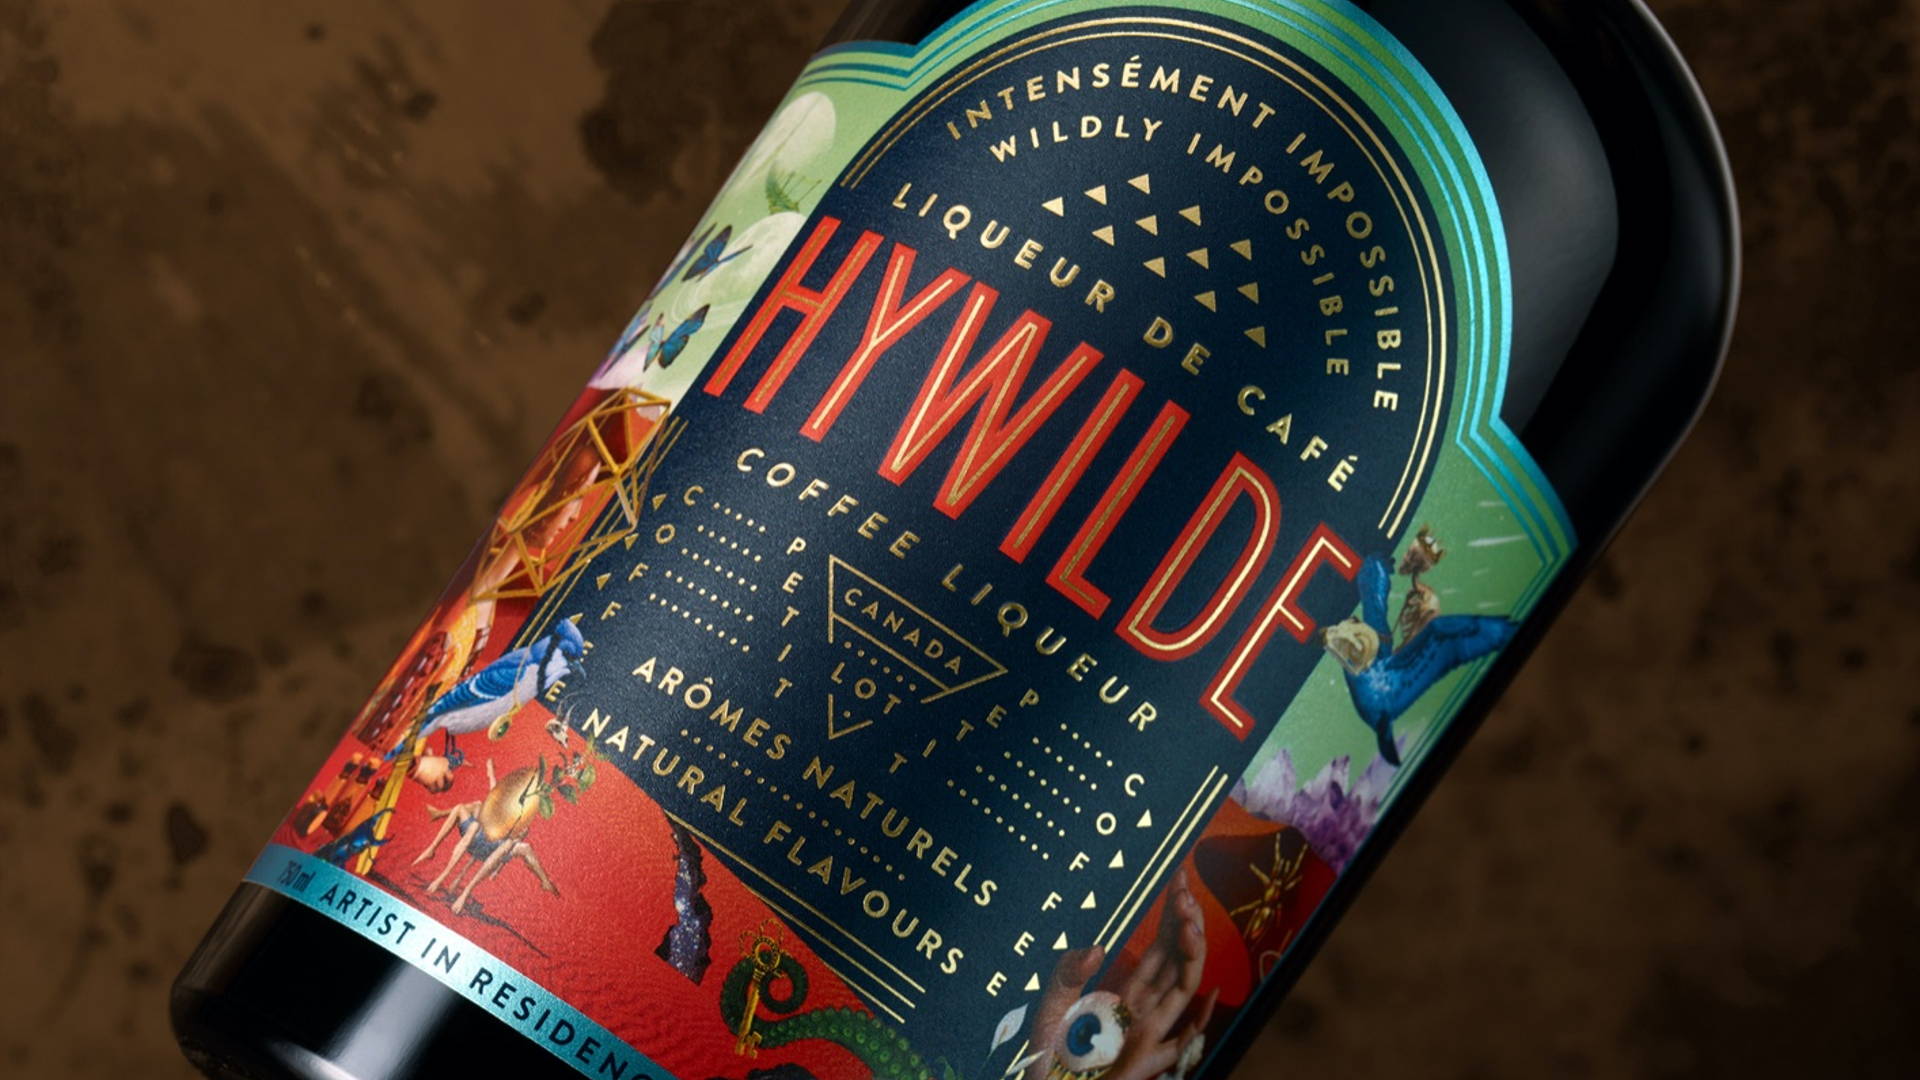 Featured image for Hywilde Is A Coffee Liqueur We All Need In Our Bar Cart